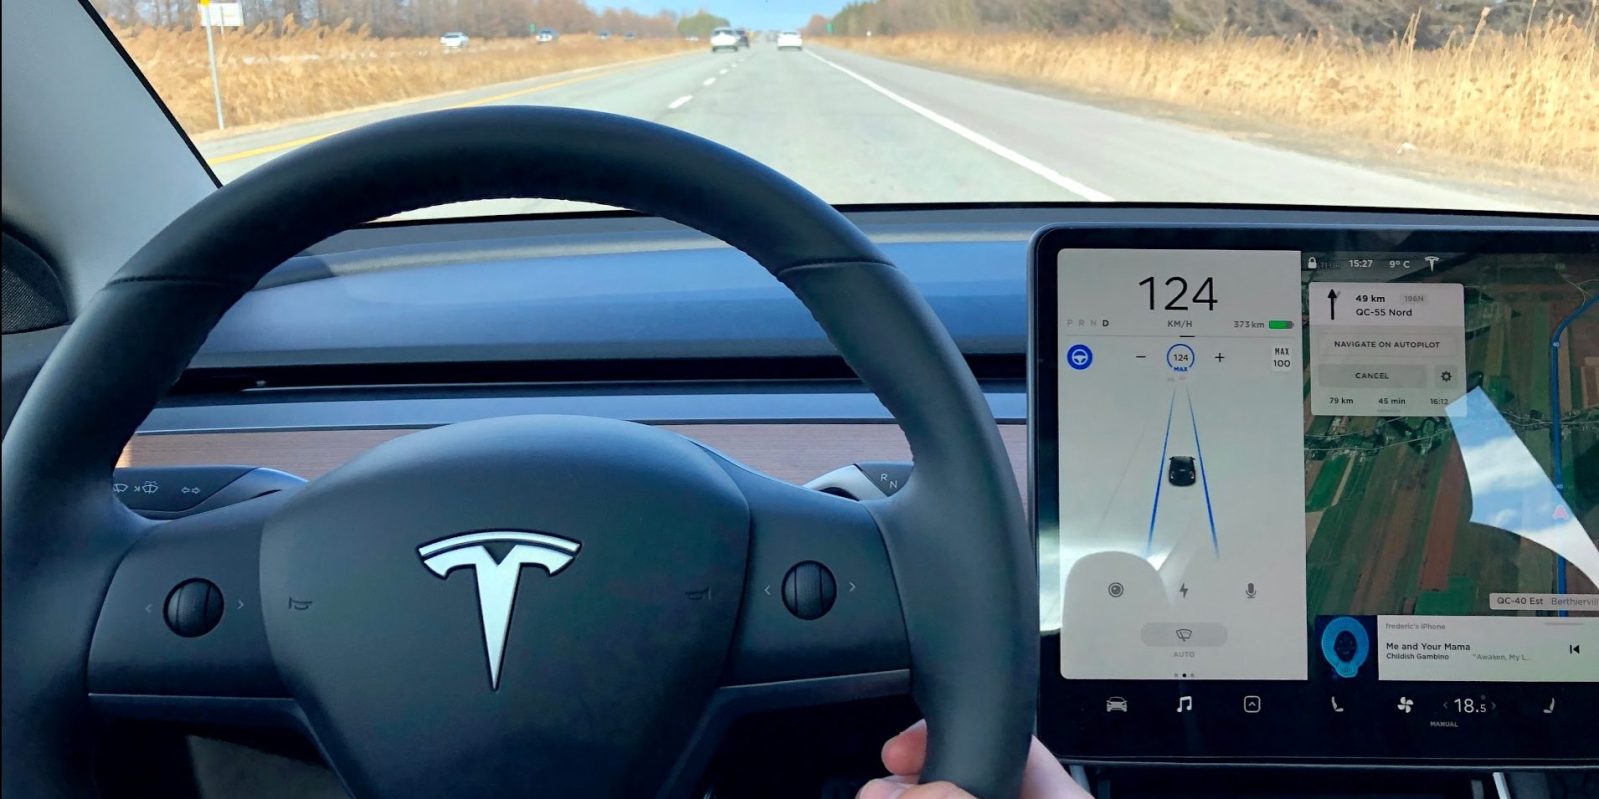 Tesla Autopilot will be able to avoid potholes on the road, says Elon Musk  